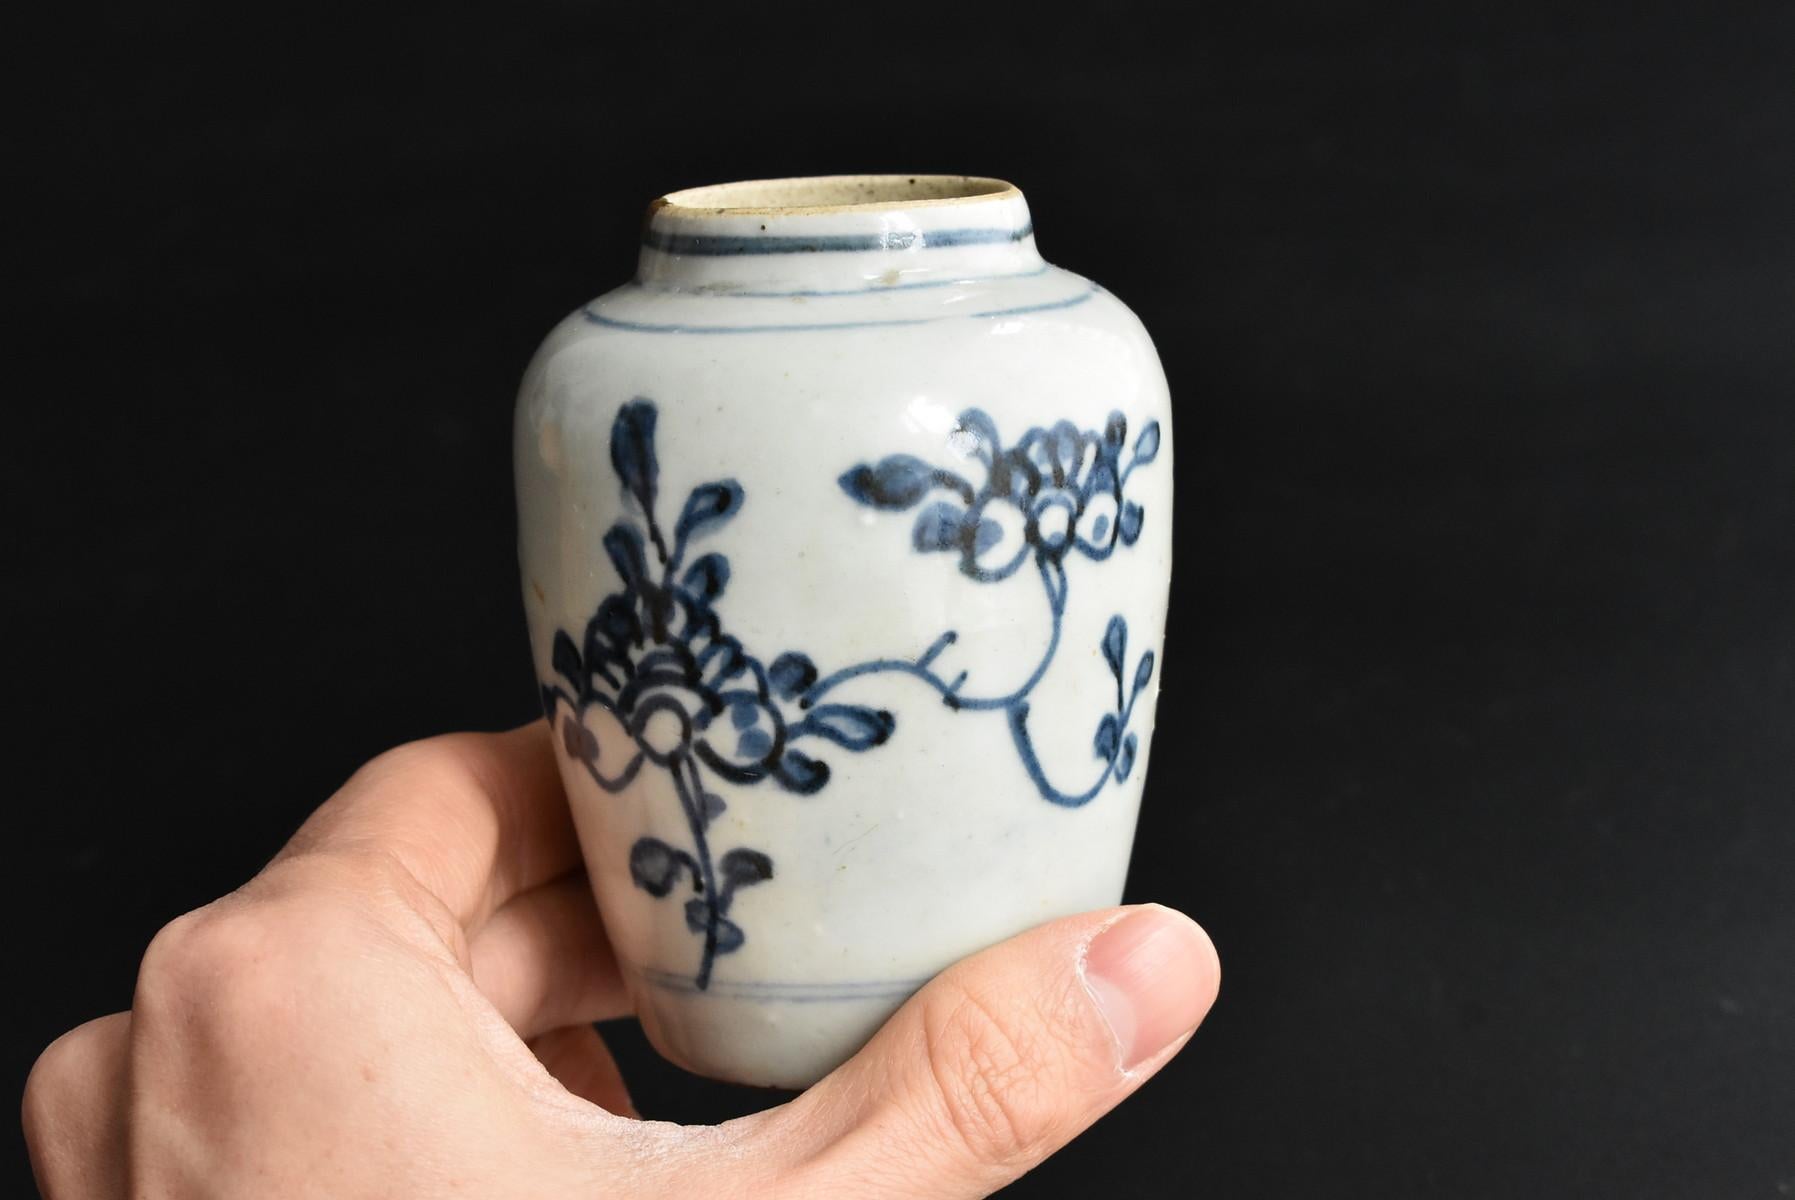 A small jar with white porcelain blue dyeing made from the end of the Ming dynasty to the beginning of the Qing dynasty in China.
Under the influence of China, Japan has begun to bake similar white porcelain products around 1600.

Although it is